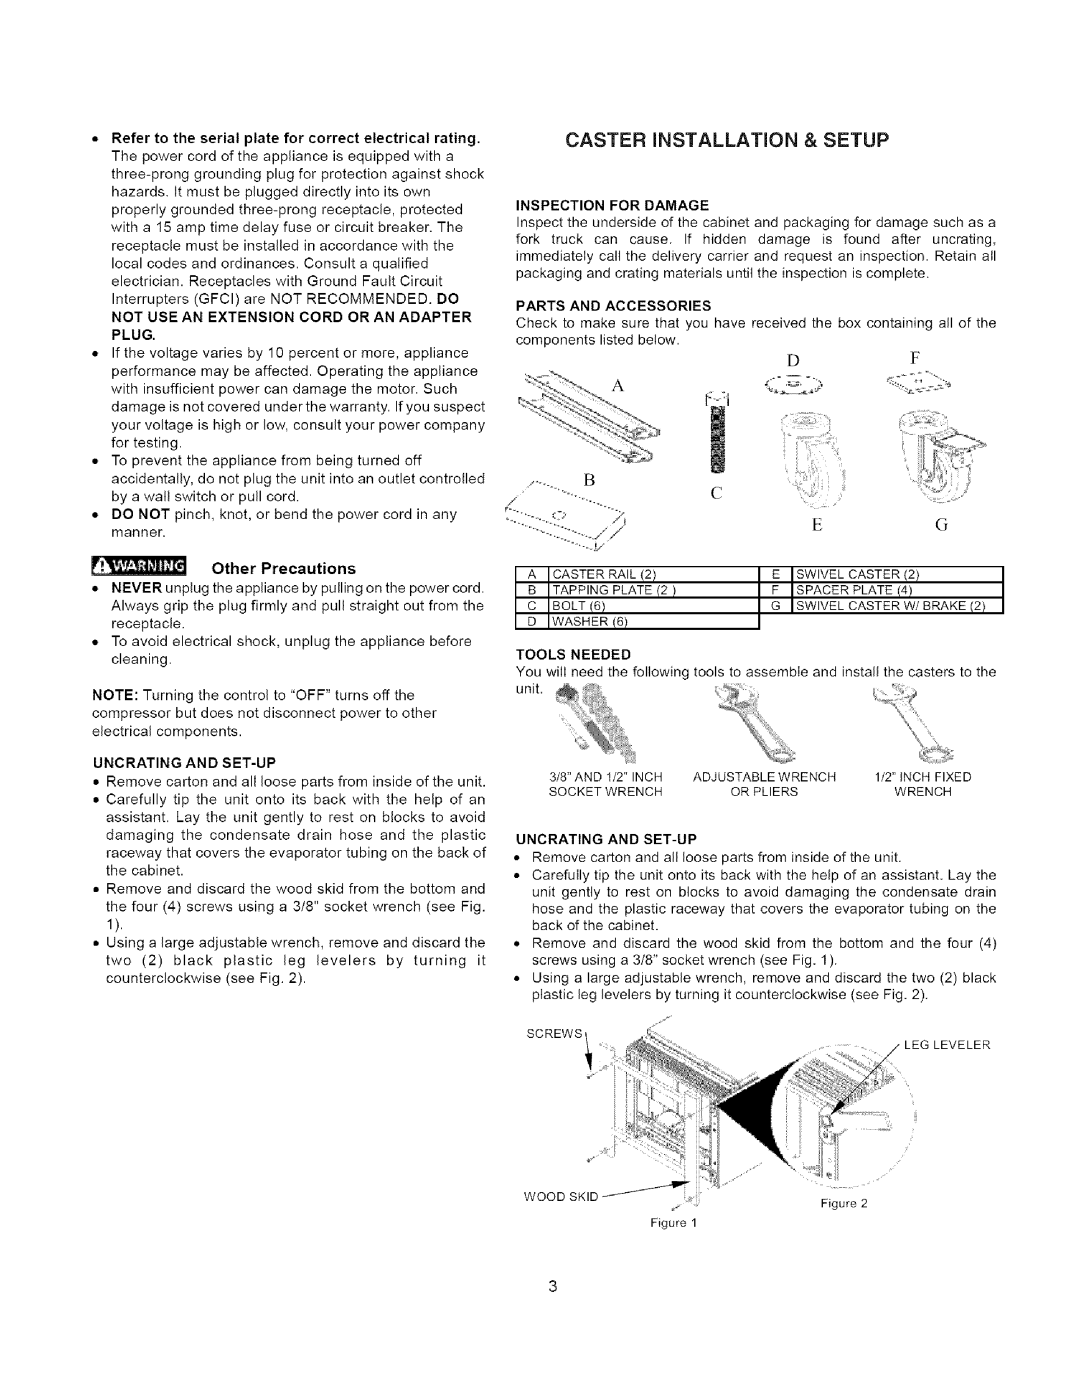 Arctic Air Refrigerator important safety instructions Caster Installation & Setup, Other Precautions 